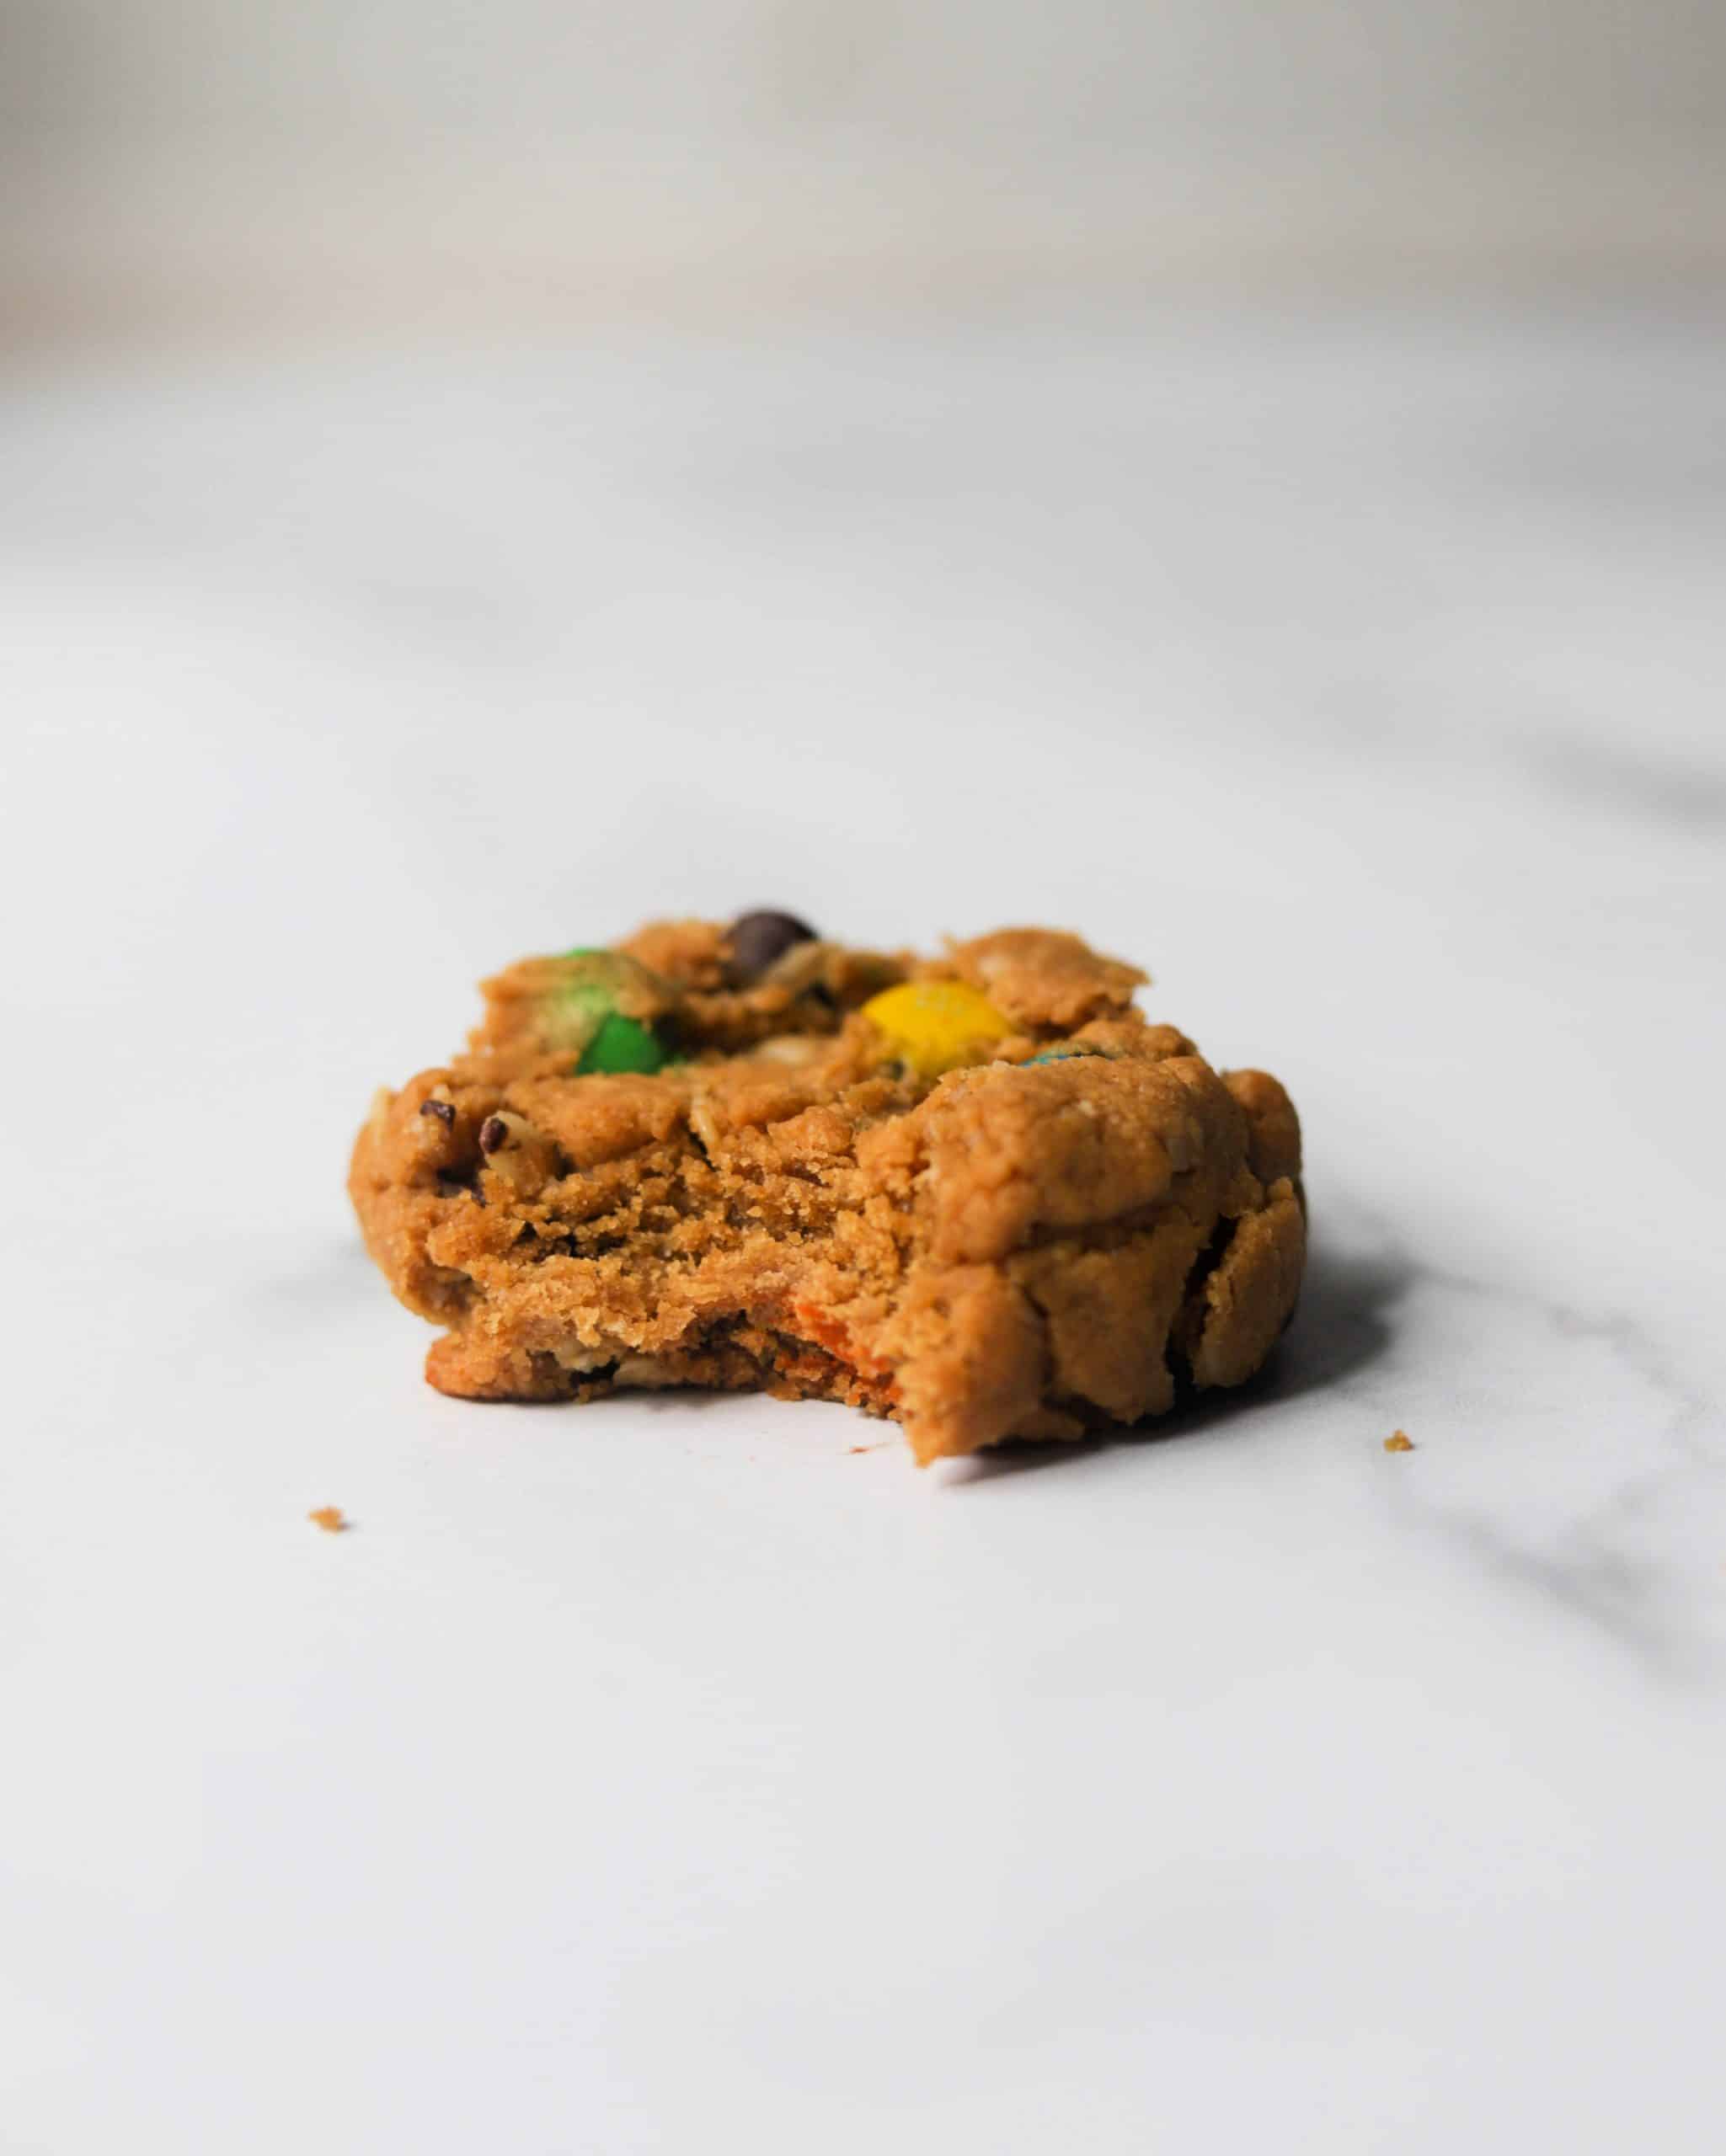 A single monster cookie on parchment paper with a bite missing.